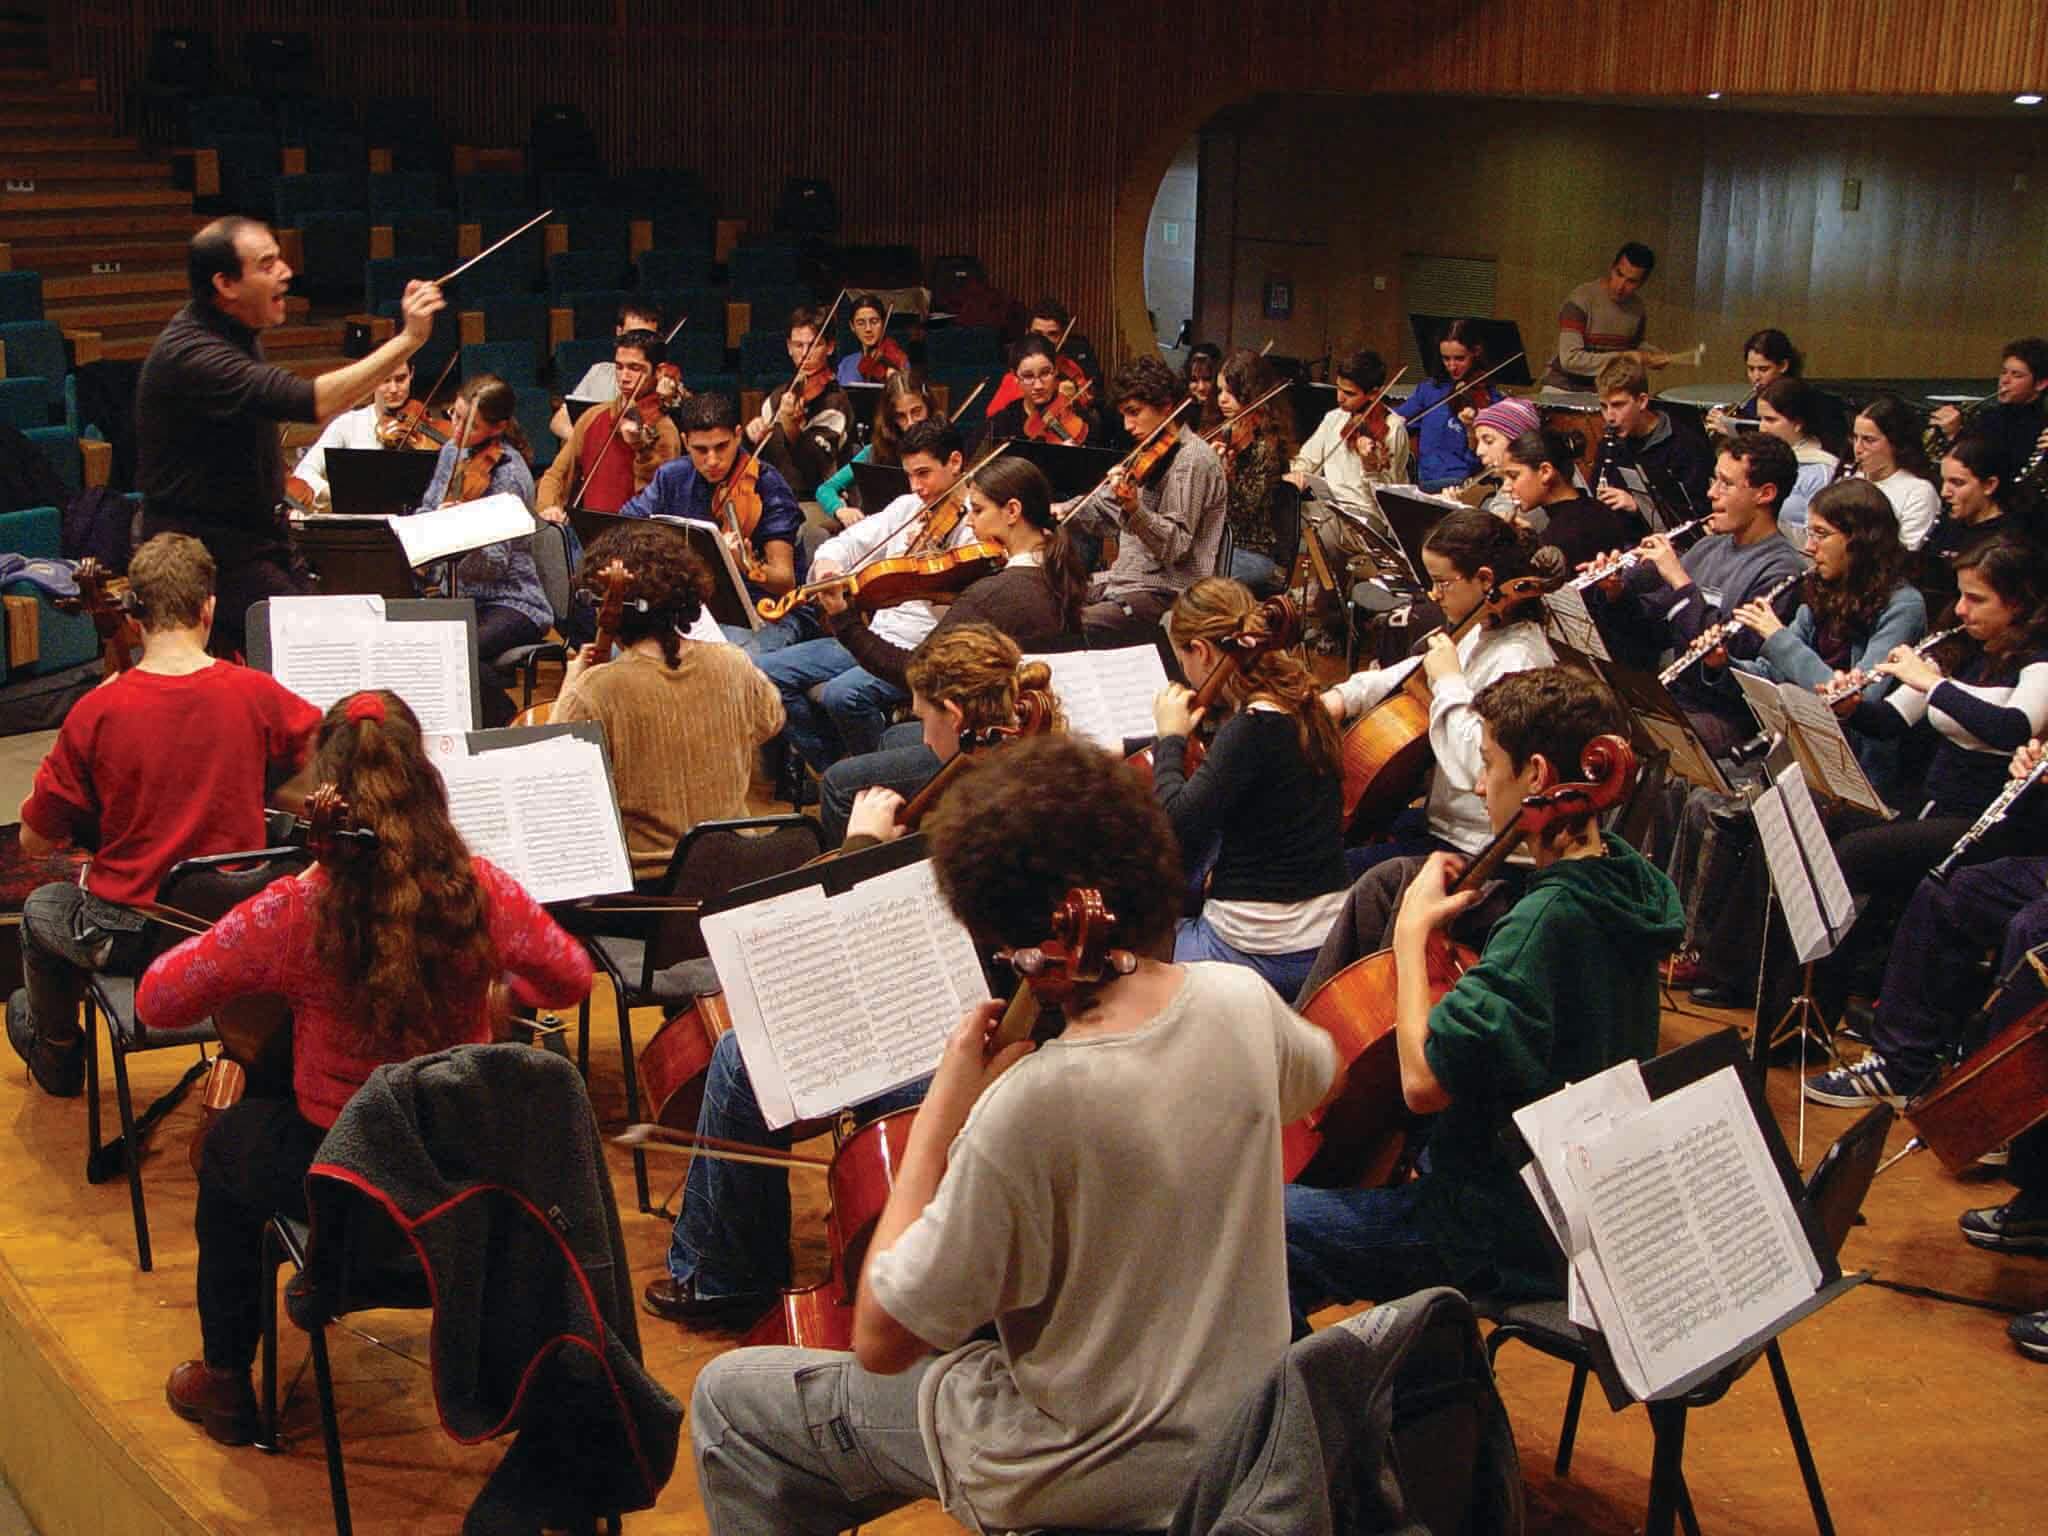 The Thelma Yellin High School of the Arts symphony orchestra in concert, 2002